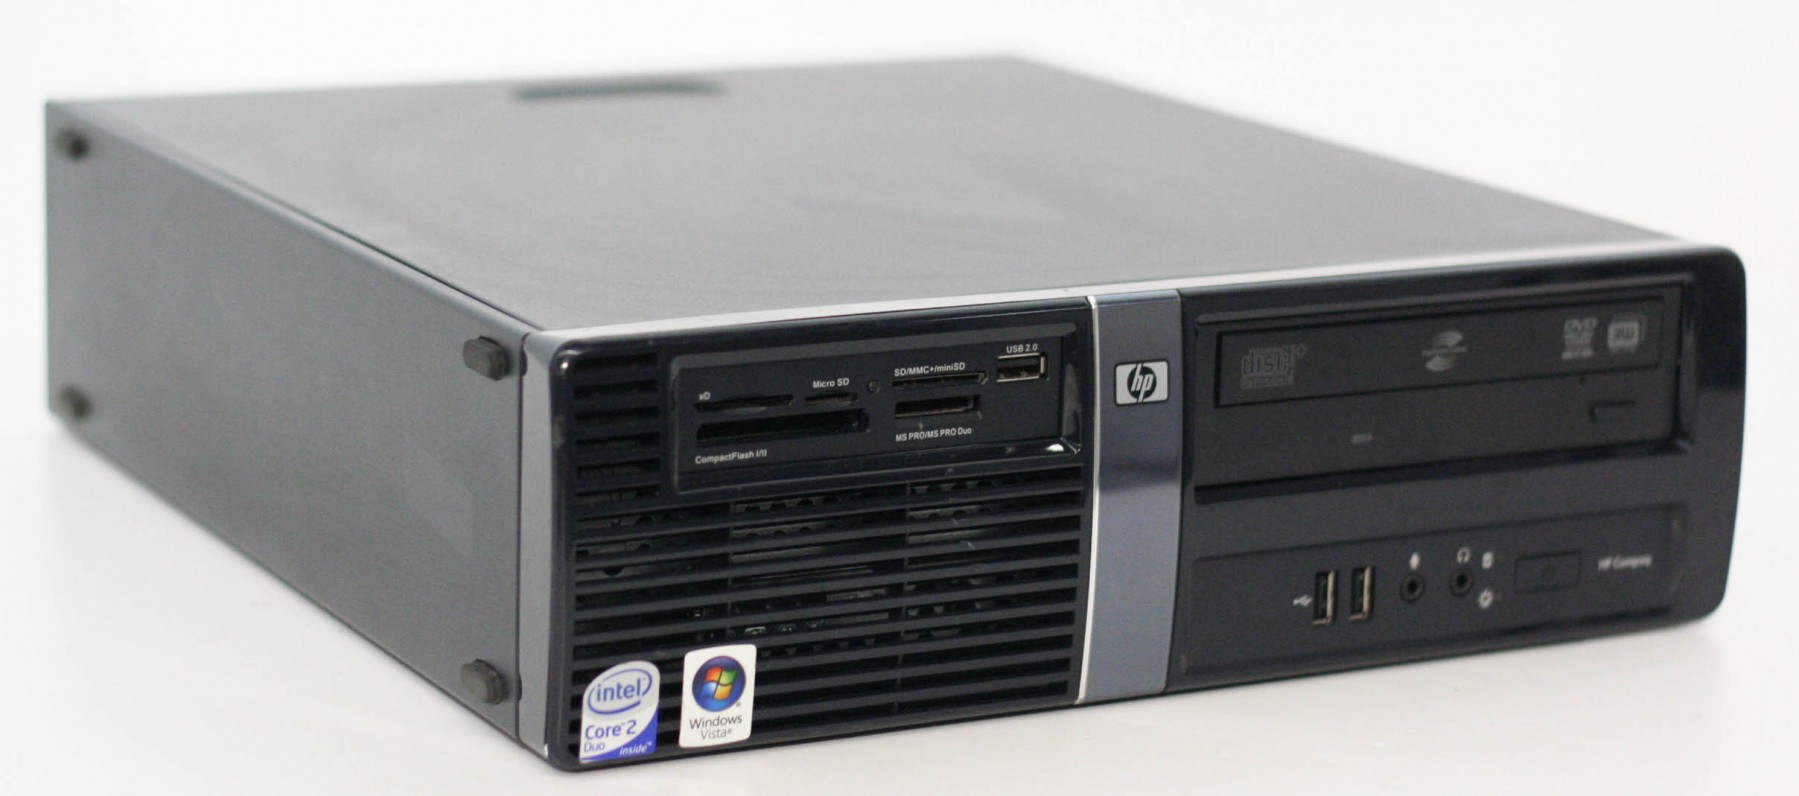 1000462-HP Compaq dx7500 Black Small Form Factor PC-image